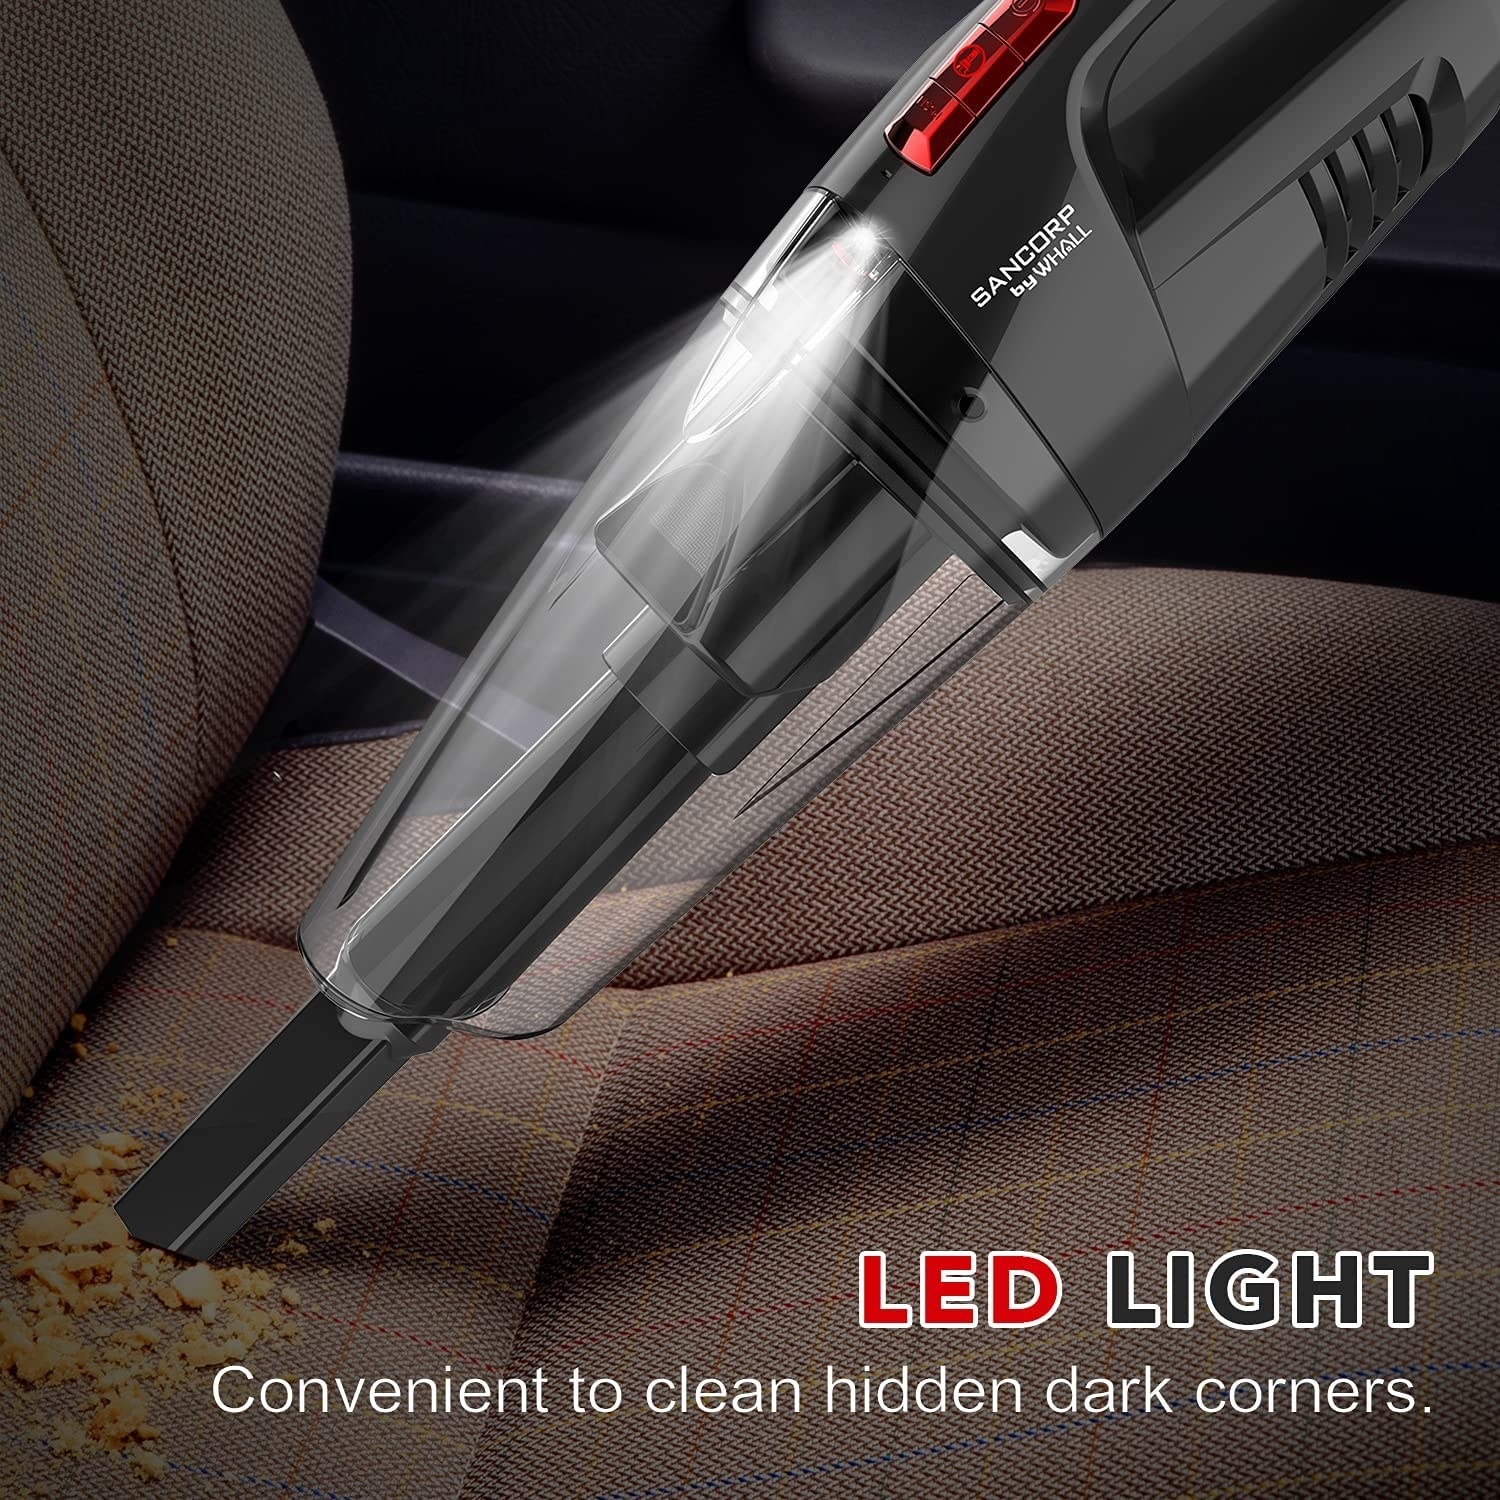 cordless vacuum picking up crumbs in a car